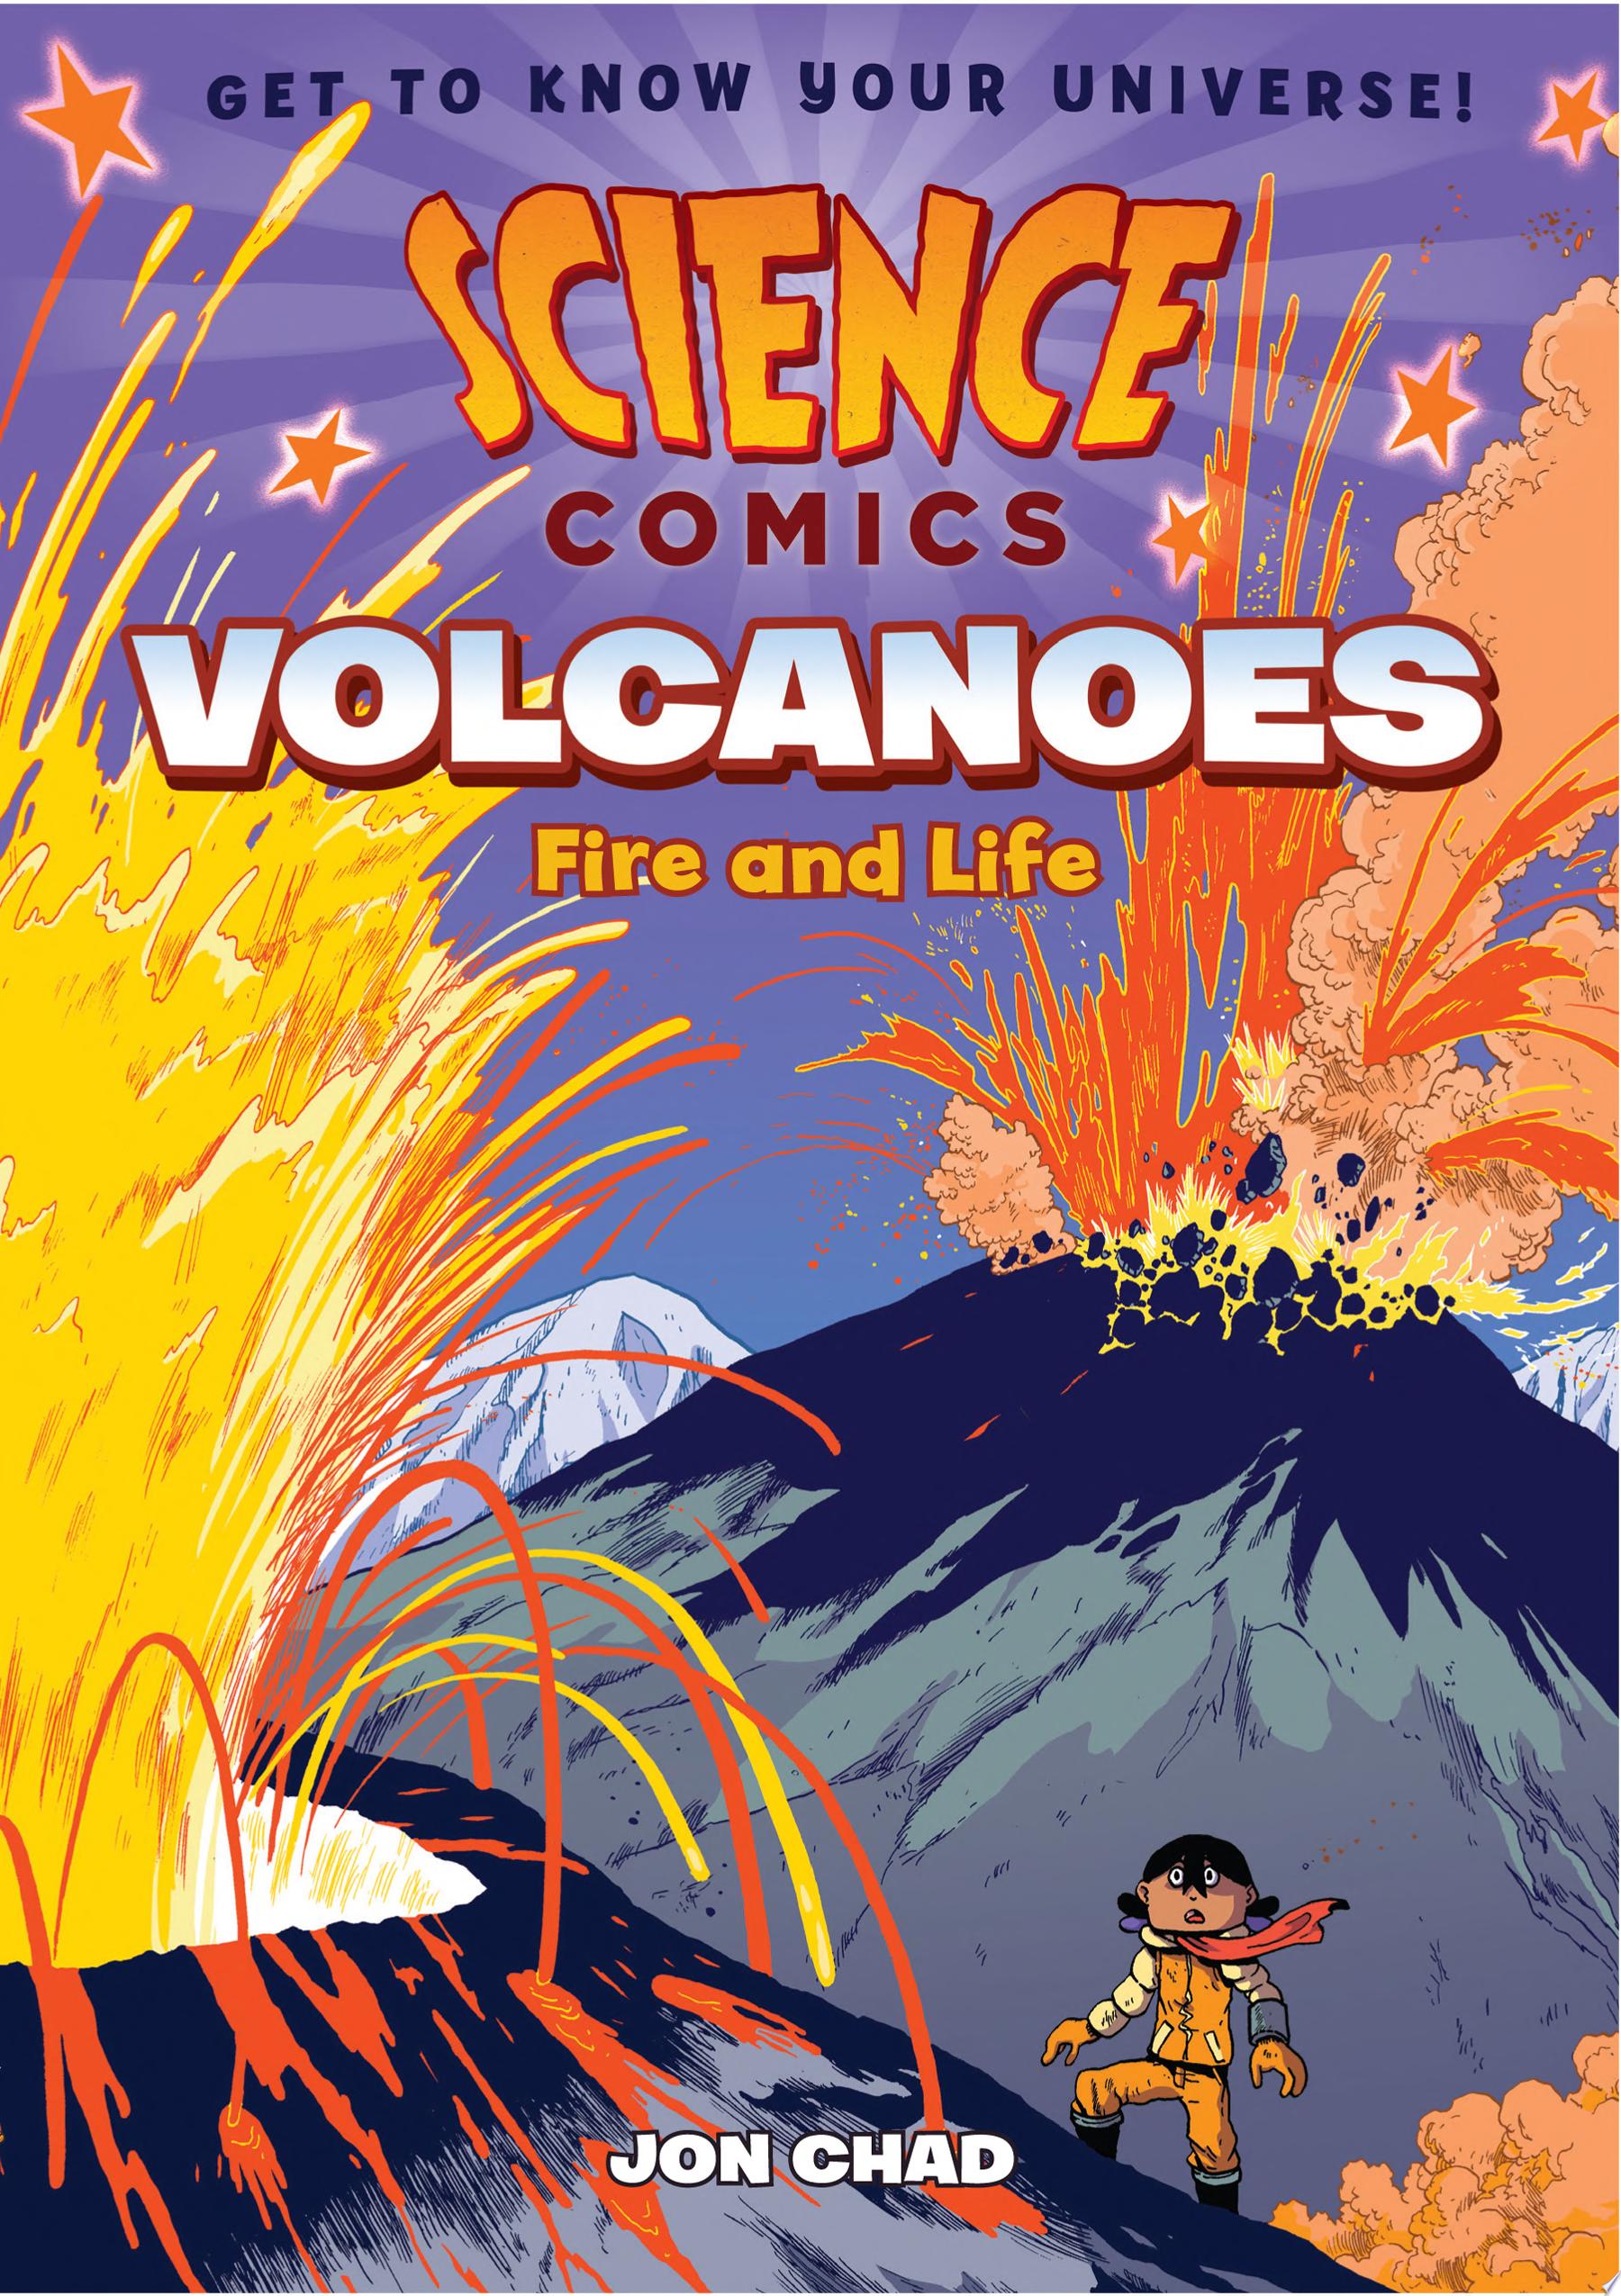 Image for "Science Comics: Volcanoes"